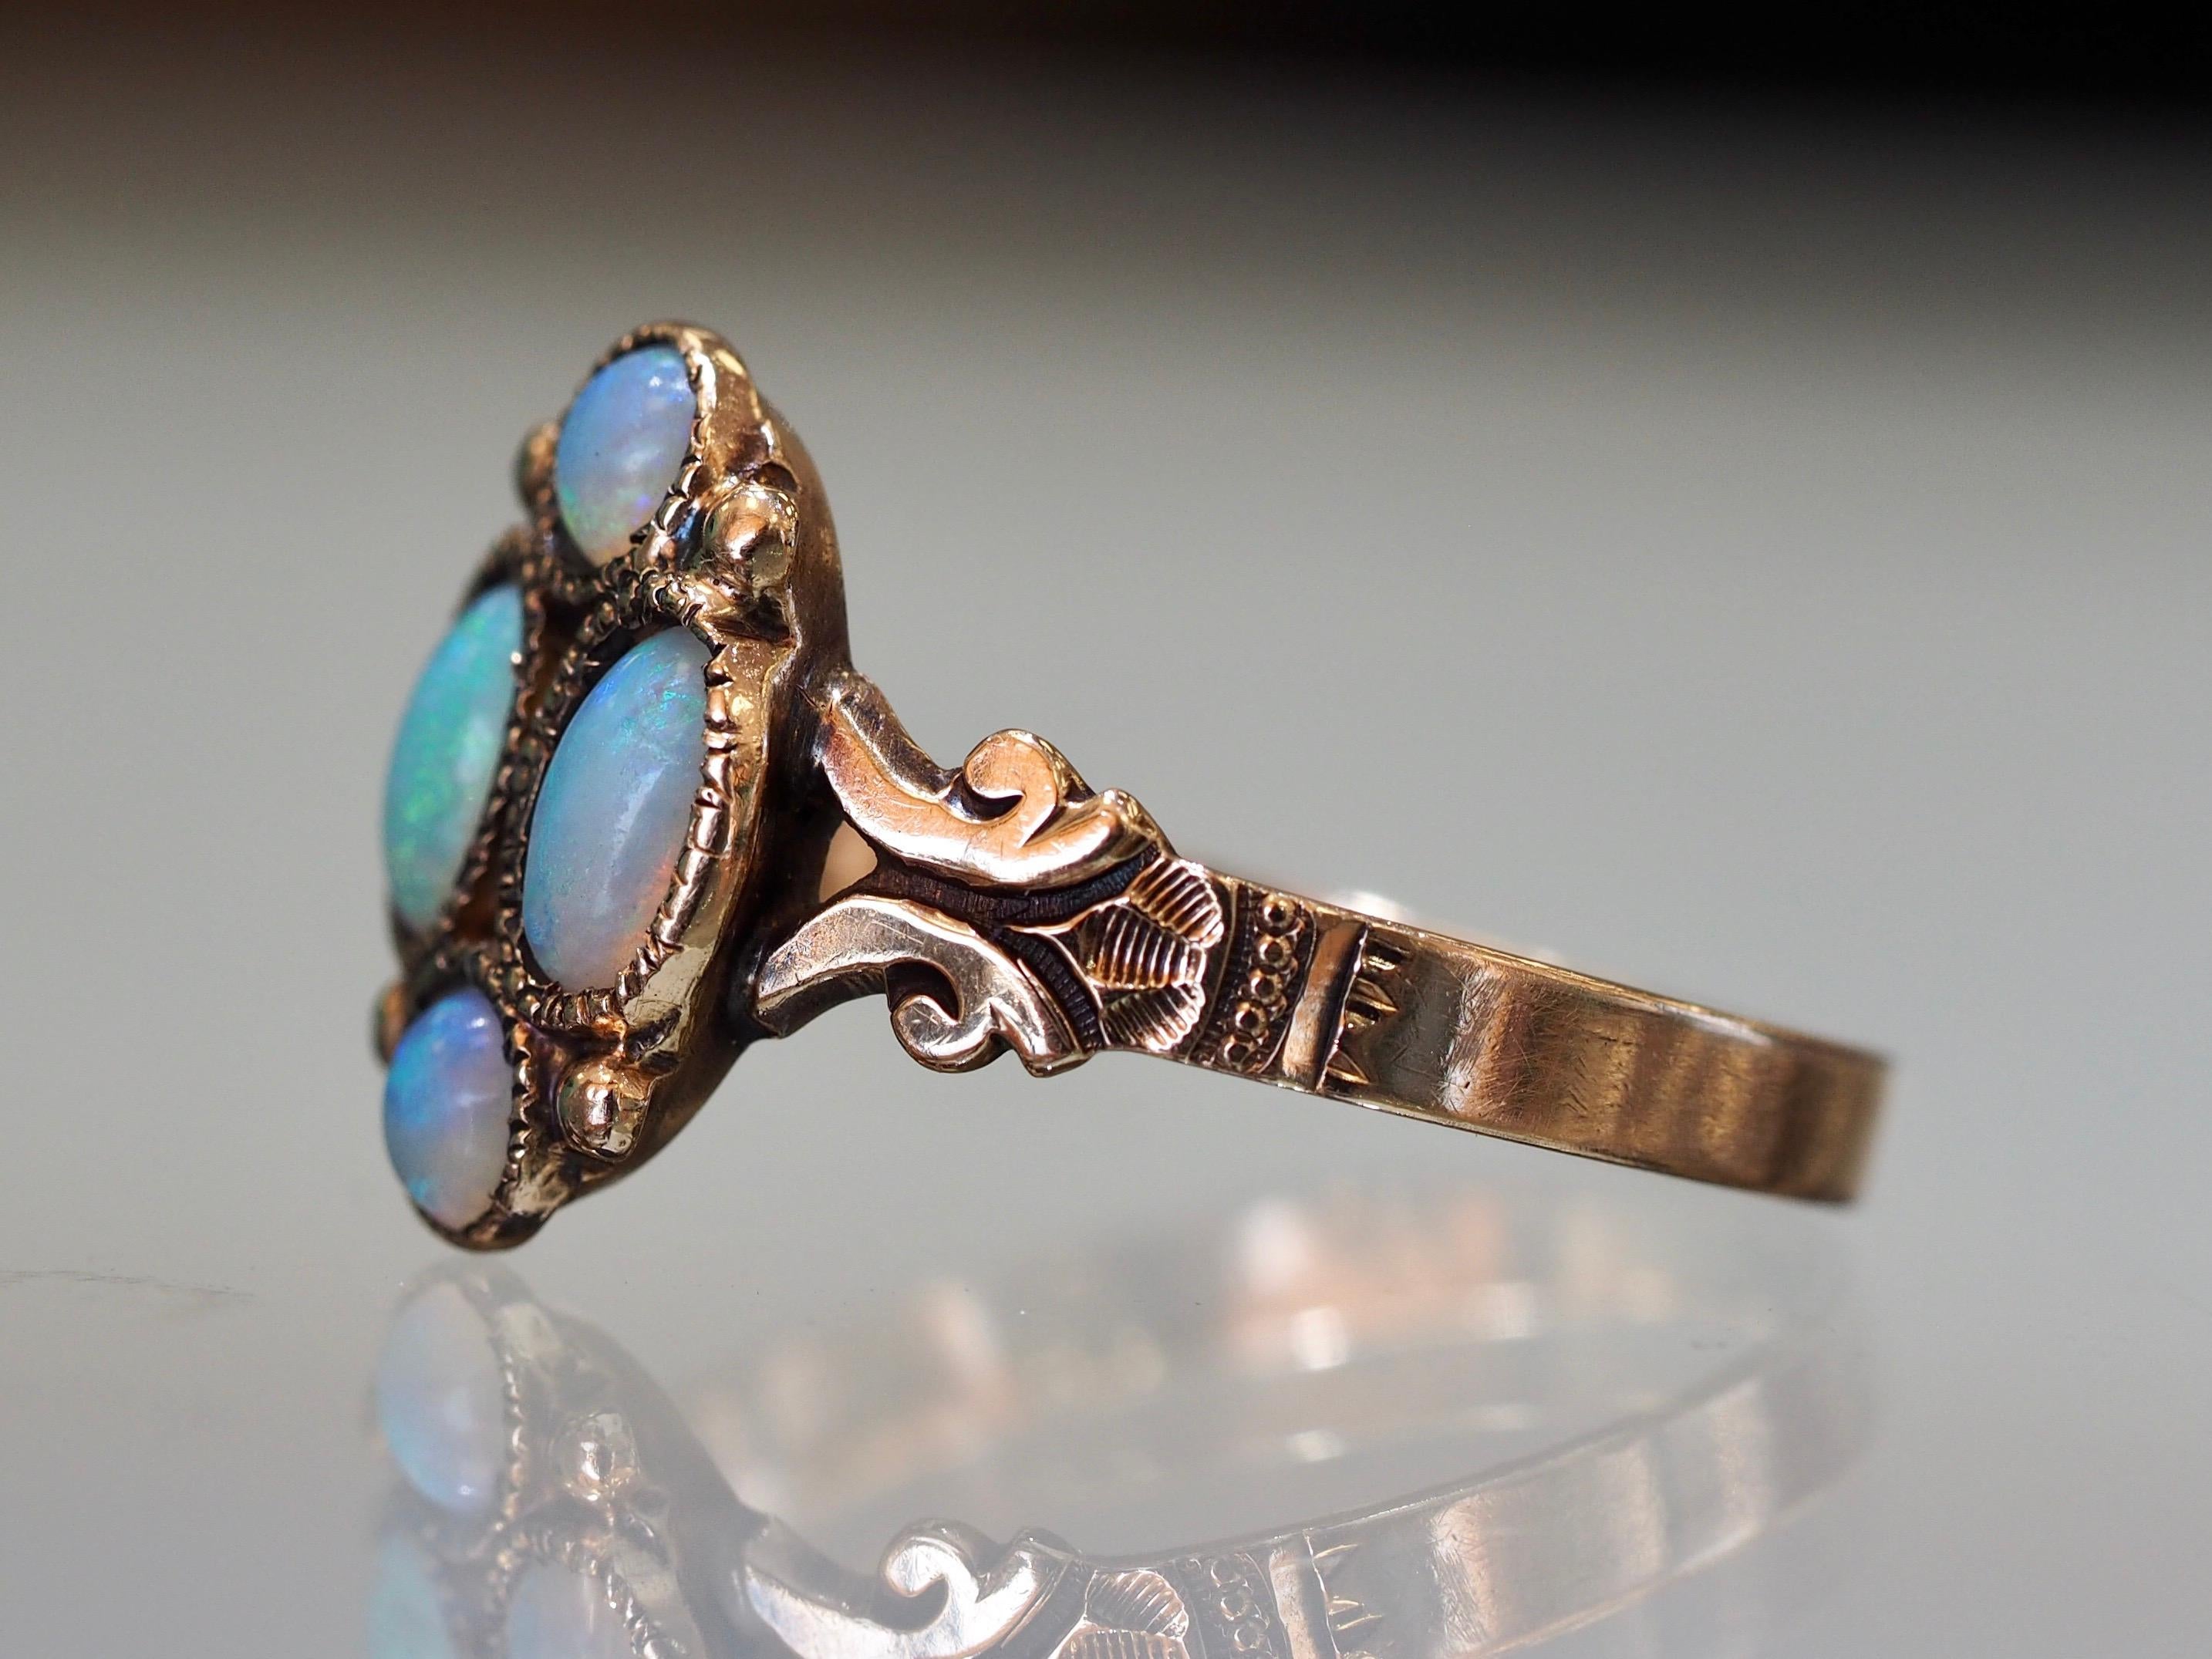 This vintage Art Deco Opal Ring is the perfect vintage everyday wear. It includes four beautiful Australian opals approximately 0.44 carats with a brilliant ray of colors at every angle. The detailing on the sides is in excellent condition and you